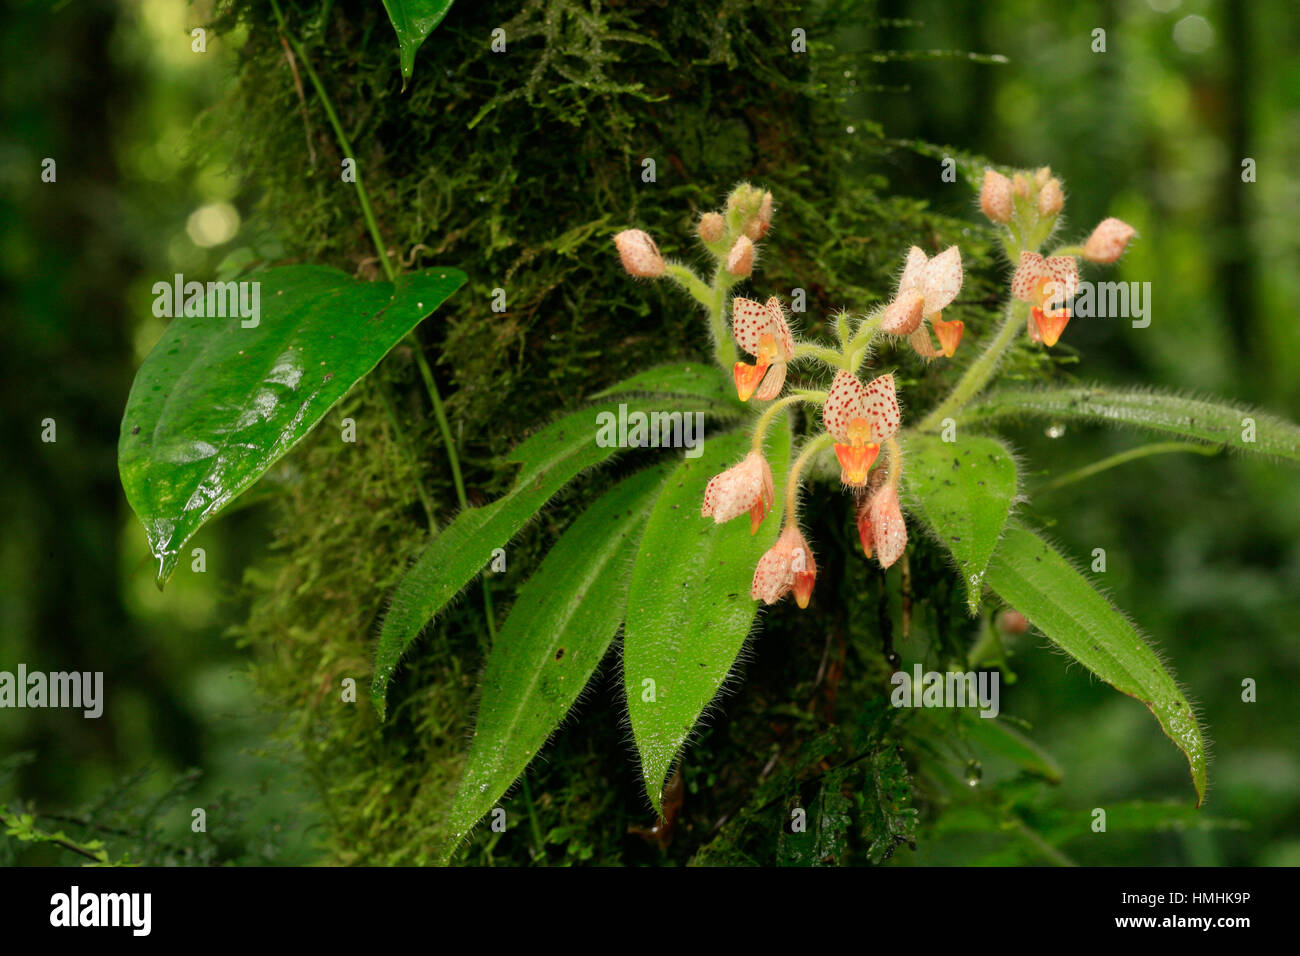 Spotted Ponthieva orchid (Ponthieva maculata). Monteverde Cloud Forest Preserve, Costa Rica Stock Photo